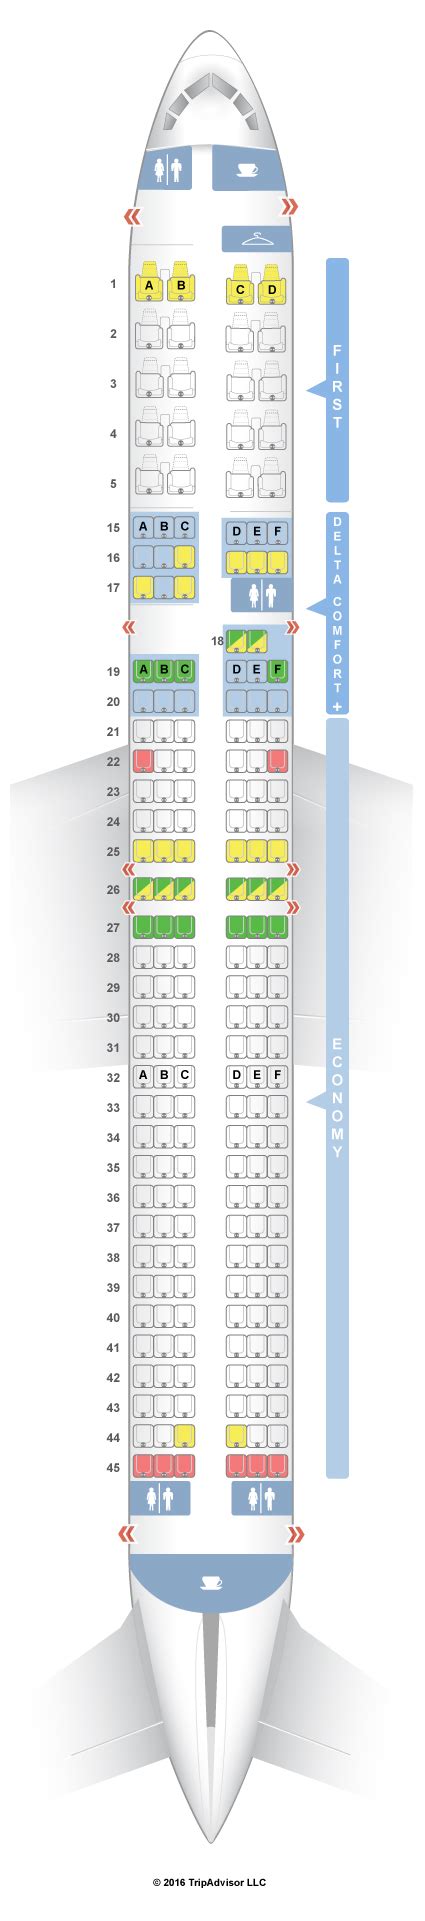 In fact, the entire first section of the Economy class can be recommended. Submitted by SeatGuru User on 2013/10/04 for Seat 66K. When booking, Emirates seat plan for this aircraft shows seats 66J and 66K as a two seat row without seat 66H. In fact seat 66H is available making this row a standard 3 seat row.. 